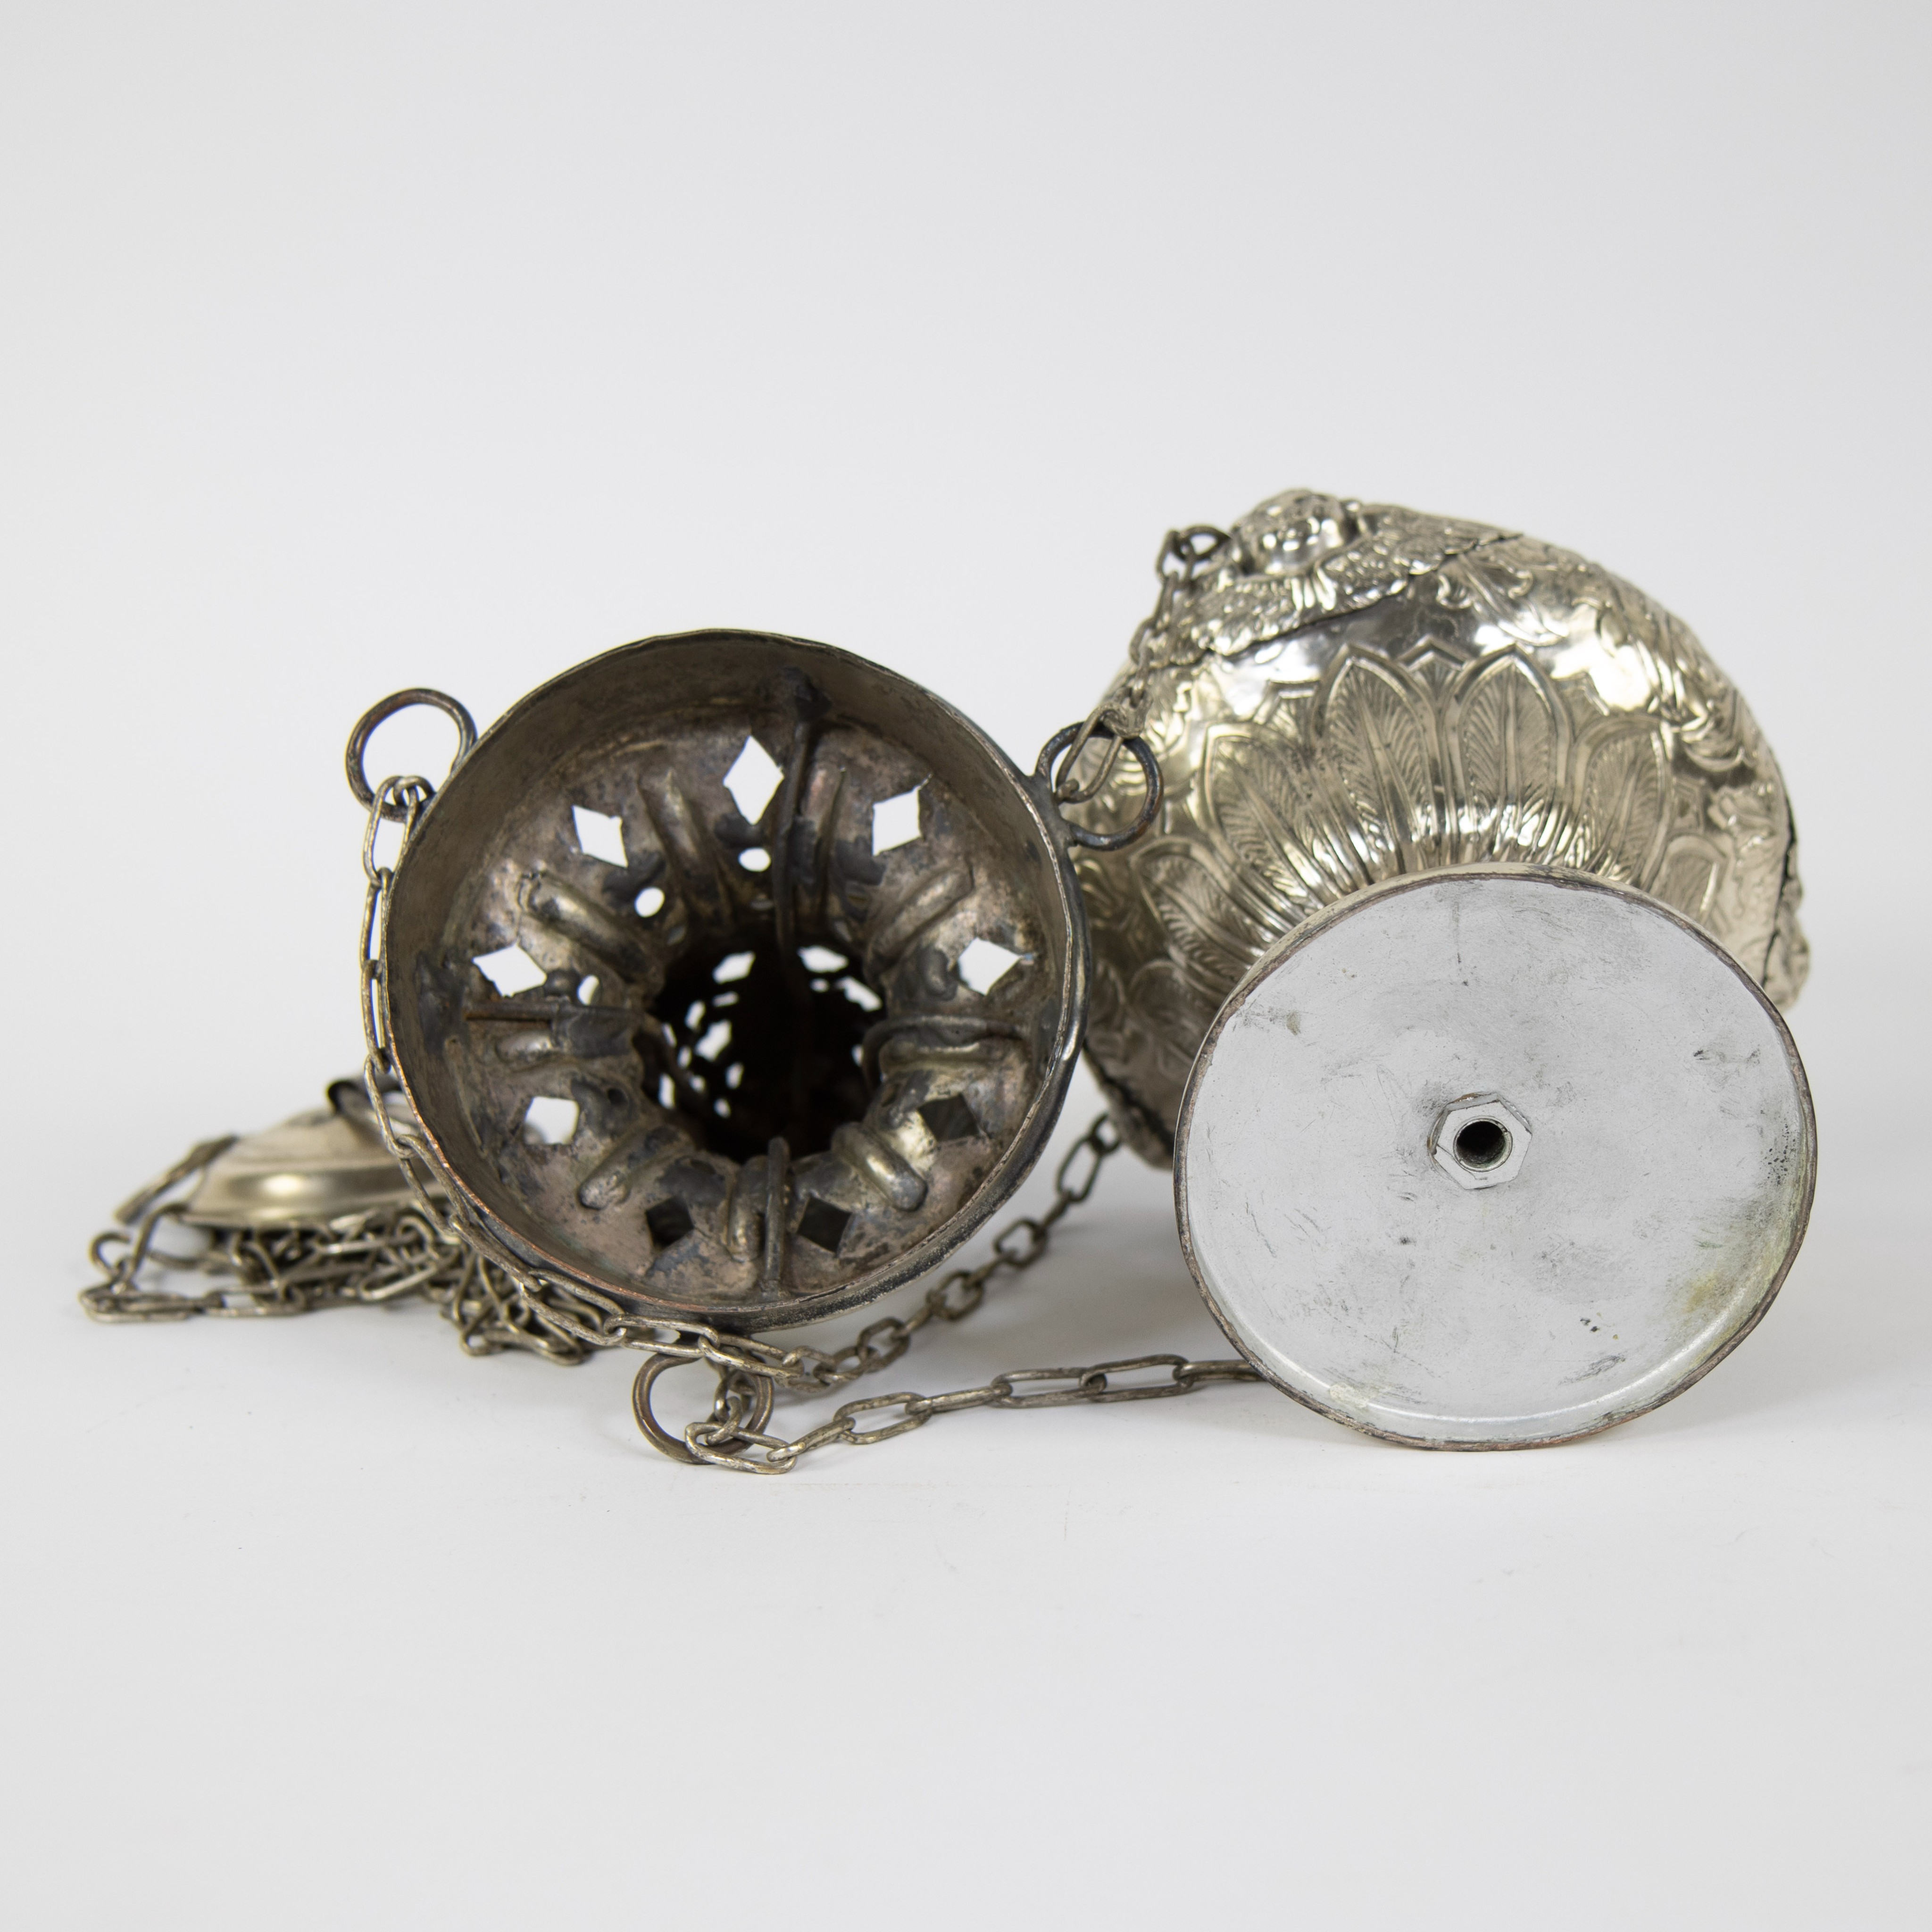 Silver plated incense burner finely embossed with leaf motifs, 19th century - Image 4 of 4